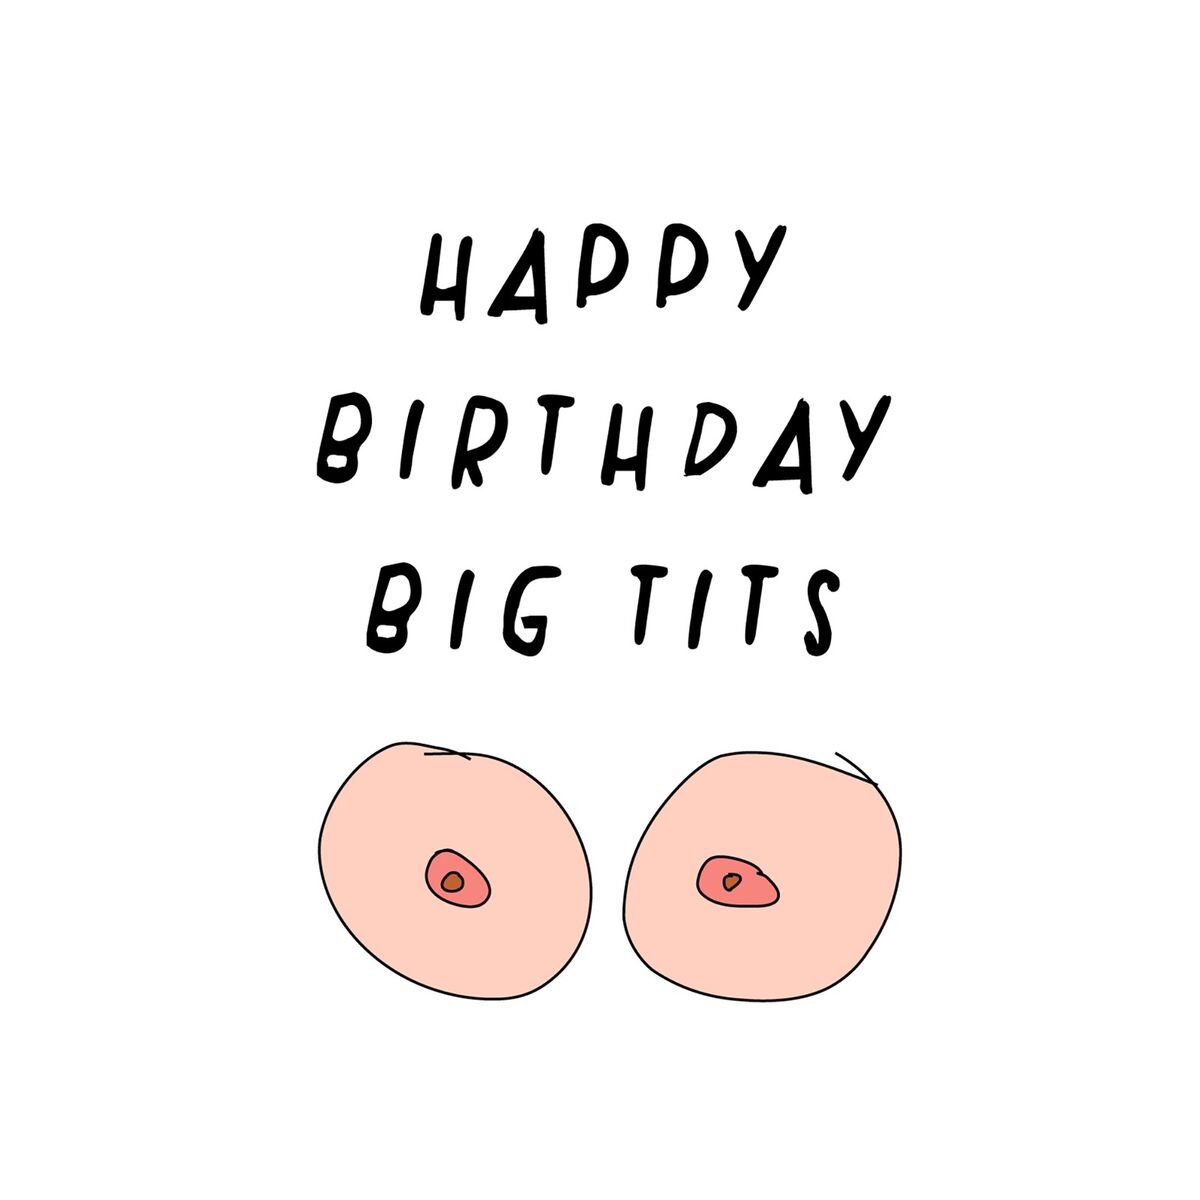 arnetha white recommends happy birthday titties pic